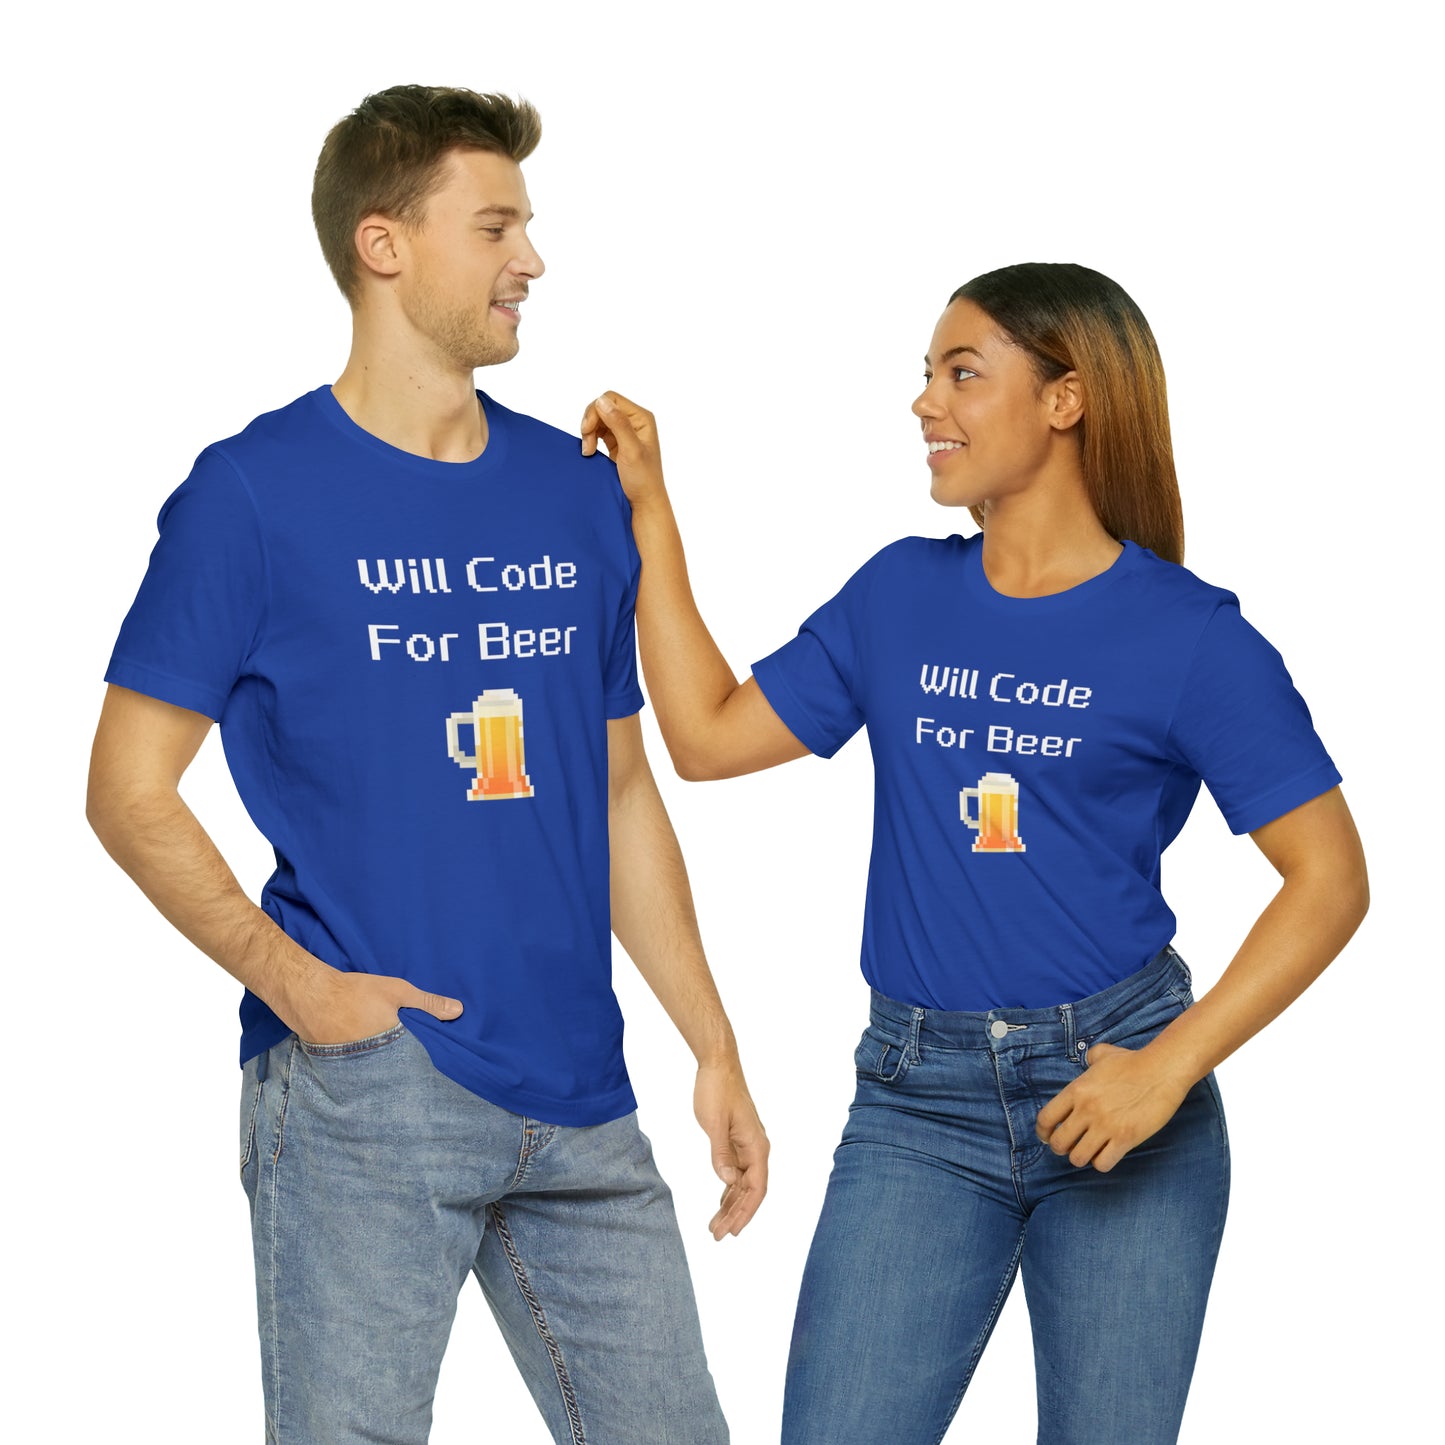 Will Code For Beer - 8-Bit Font With Beer Icon | T-Shirt